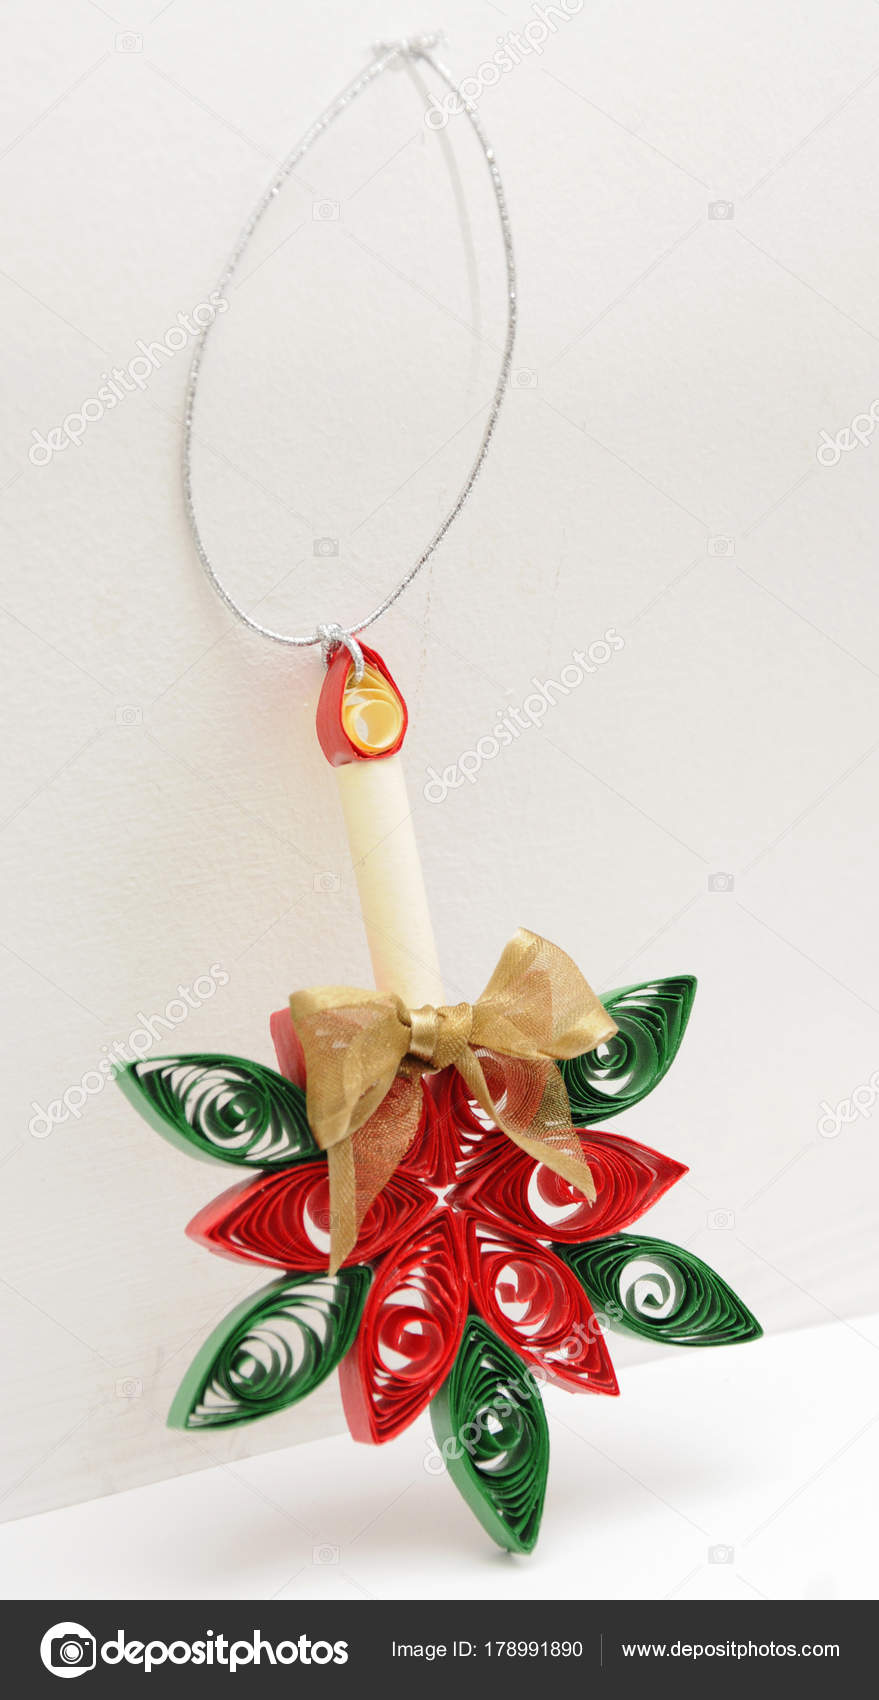 Immagini Quilling Natale.Quilling Mistletoe Candle Christmas Ornament Stock Photo C 123 Setsuna 178991890